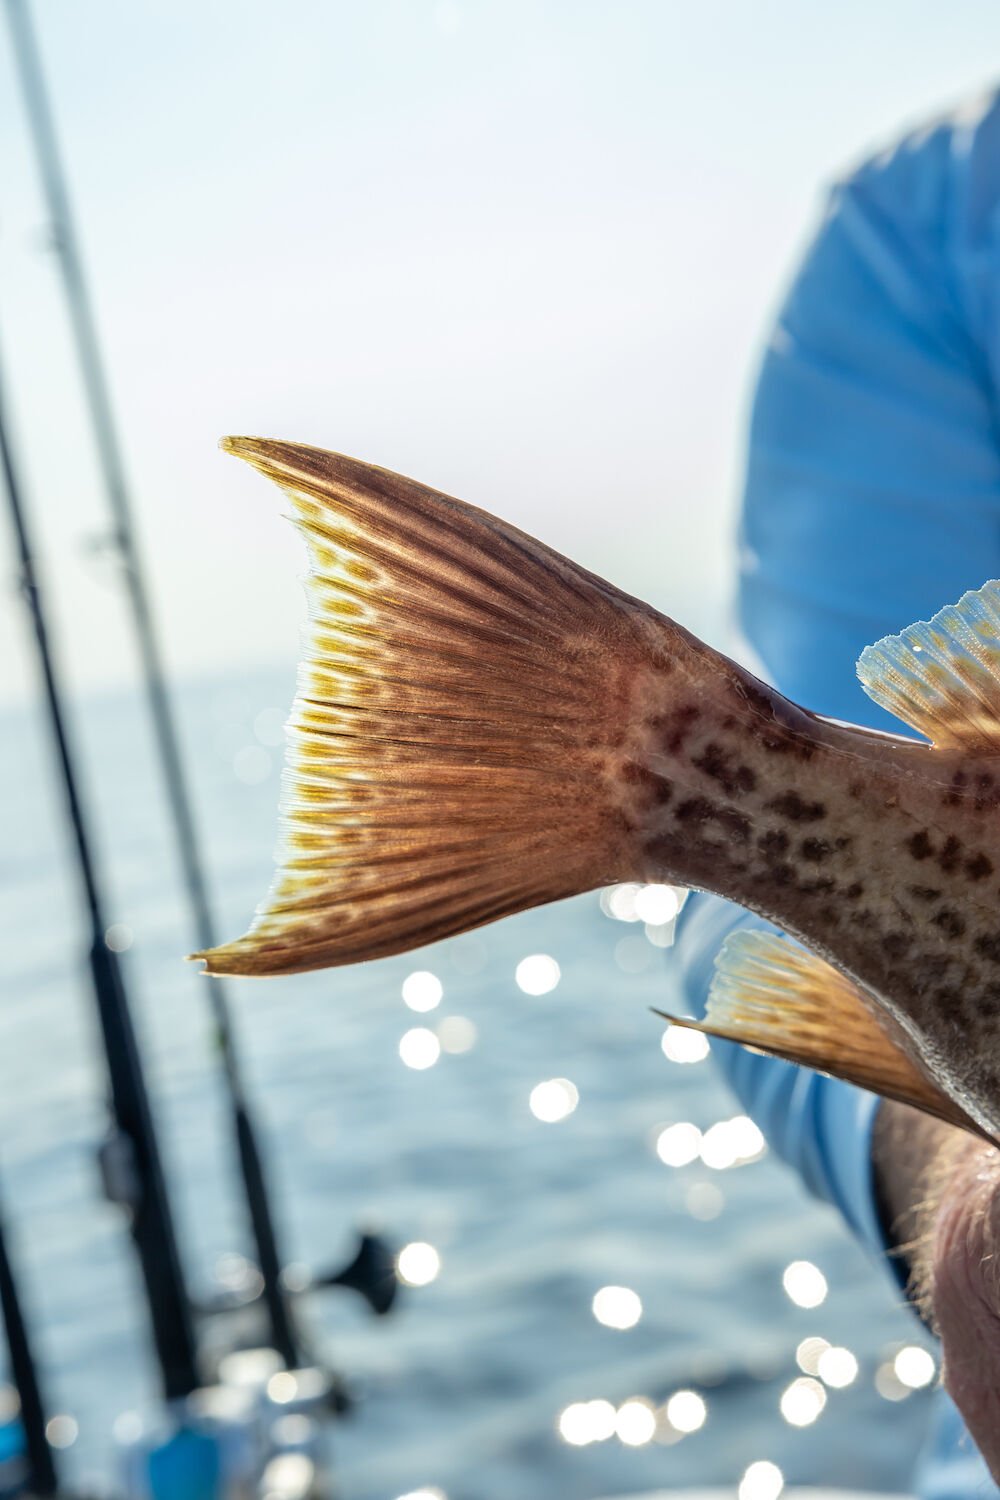 Expert Tactics for Targeting Scamp Grouper